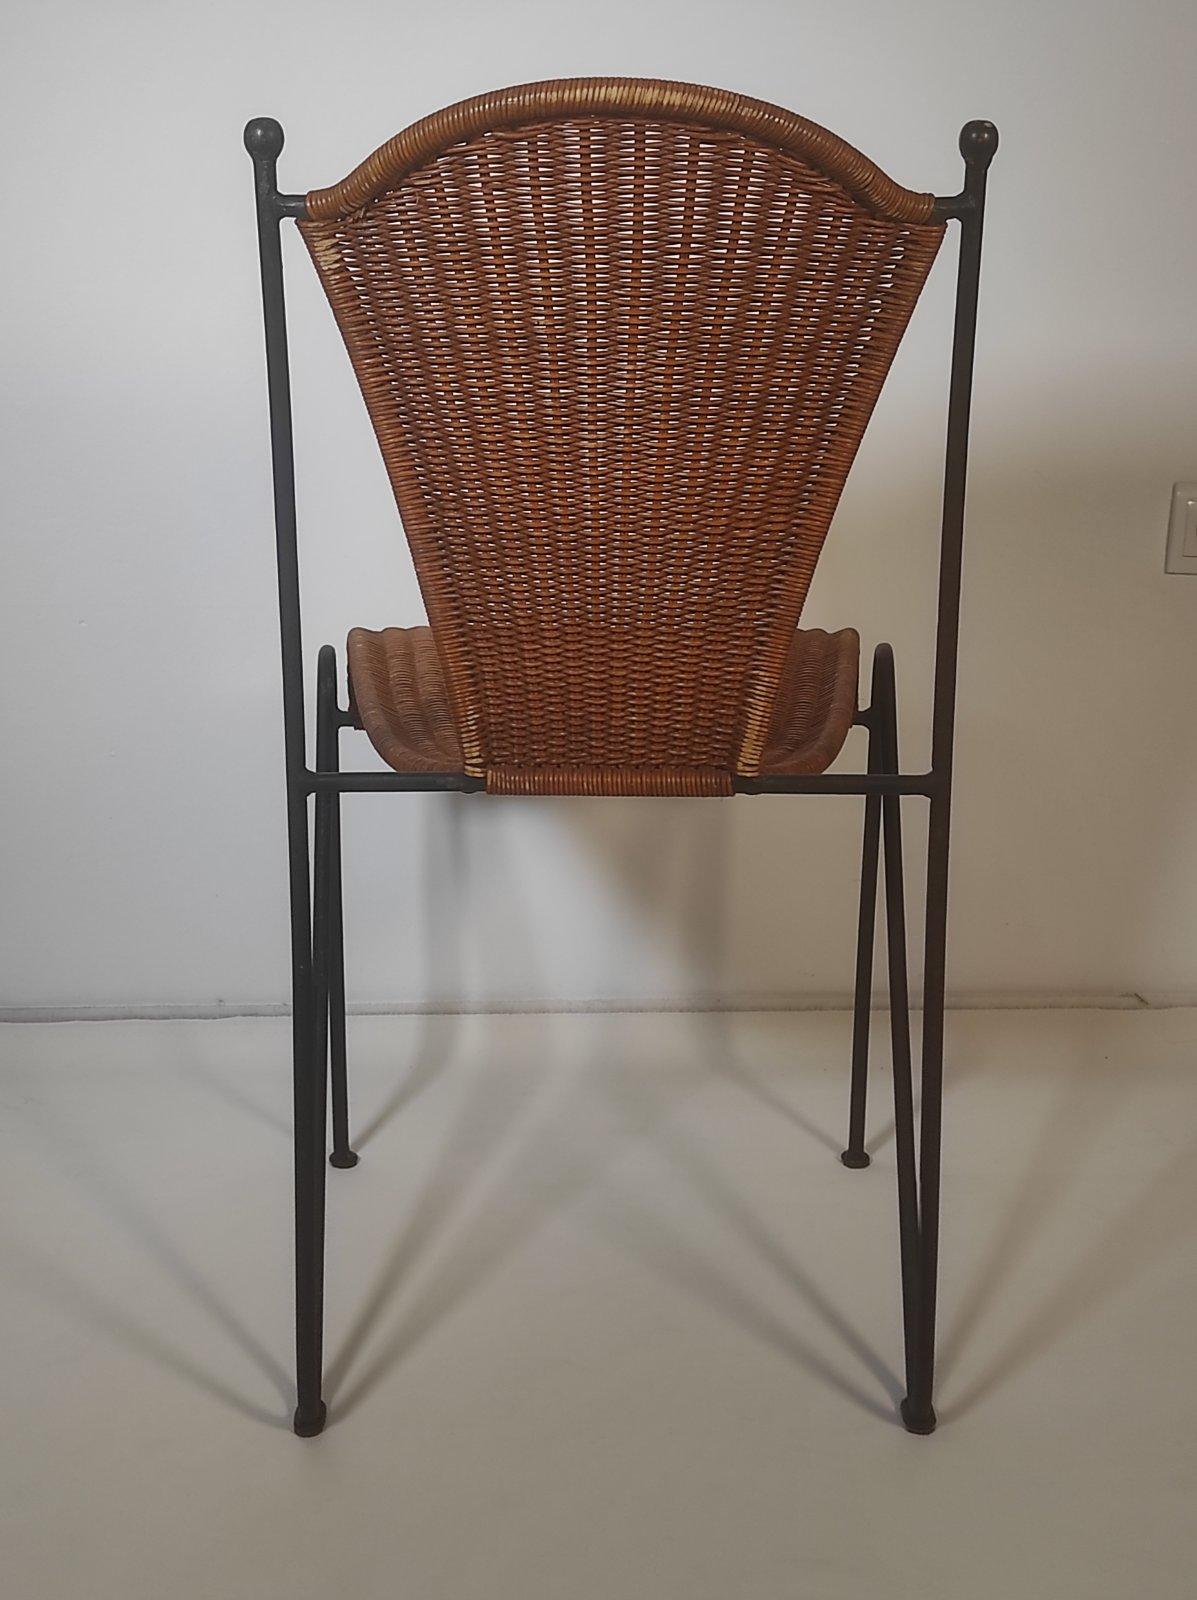 Mid-20th Century Frederic Weinberg Wicker and Iron Chair 1950s